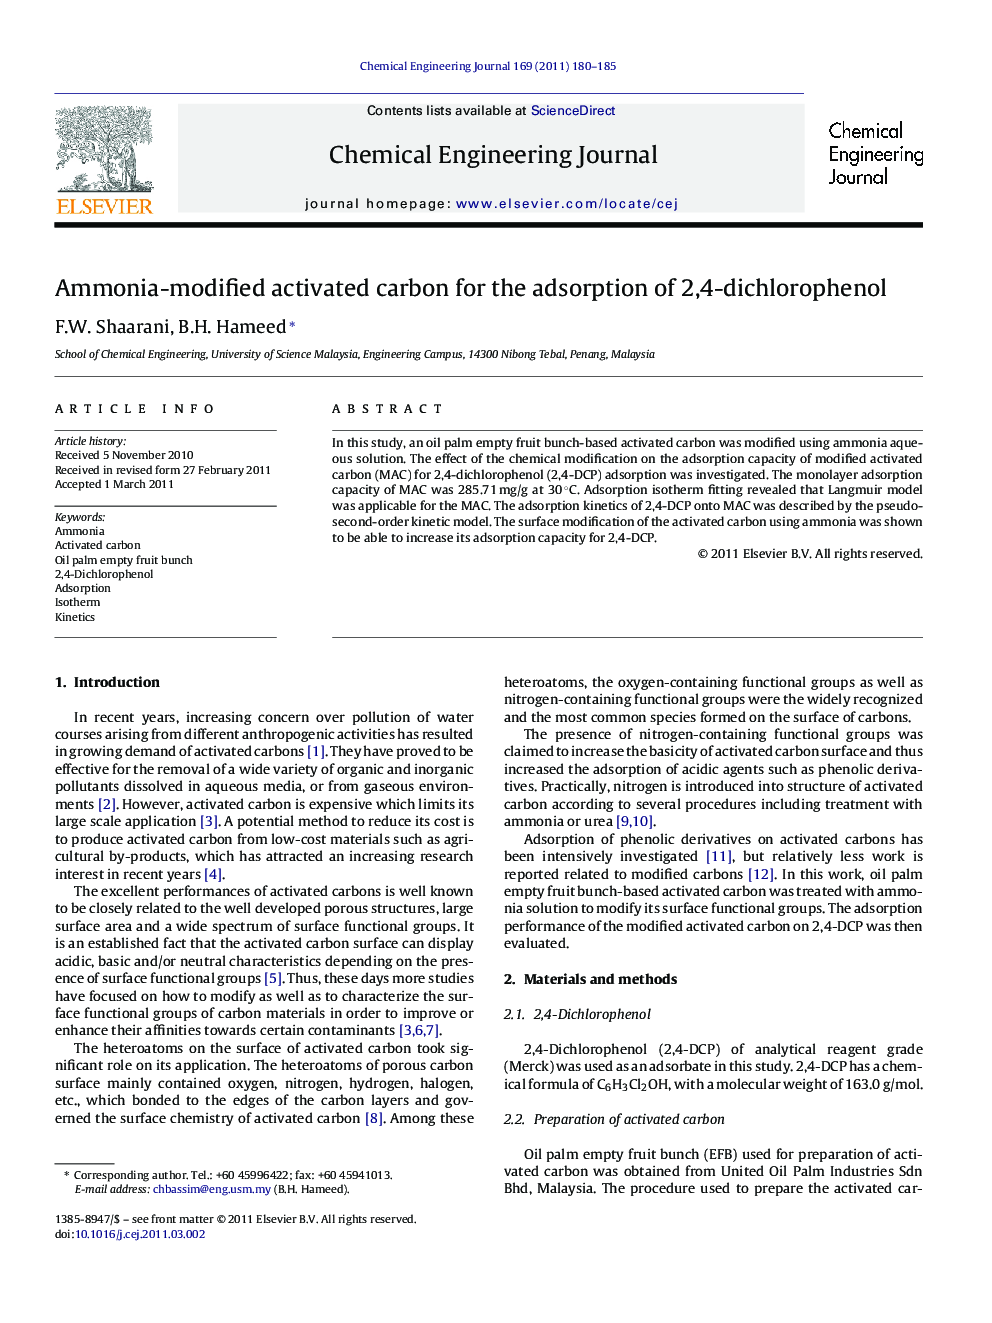 Ammonia-modified activated carbon for the adsorption of 2,4-dichlorophenol